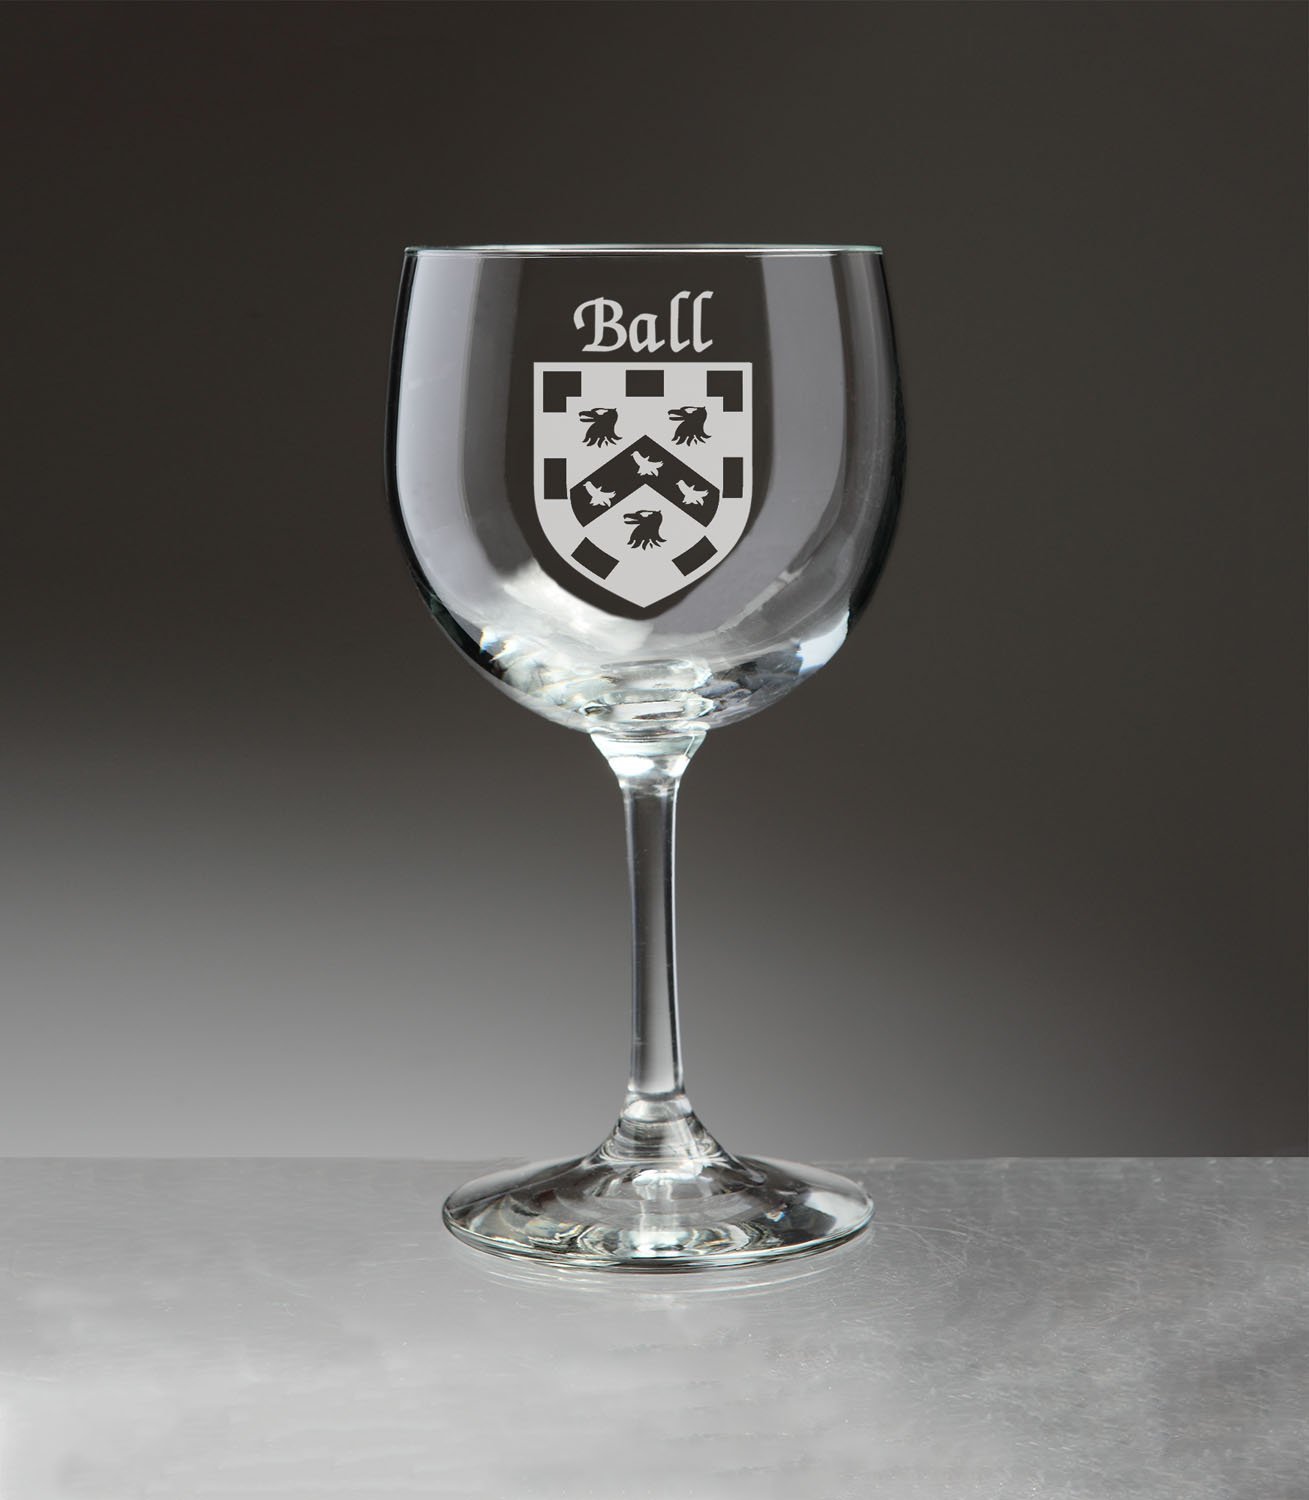 Ball Irish Coat of Arms Red Wine Glasses - Set of 4 (Sand Etched) - $67.32